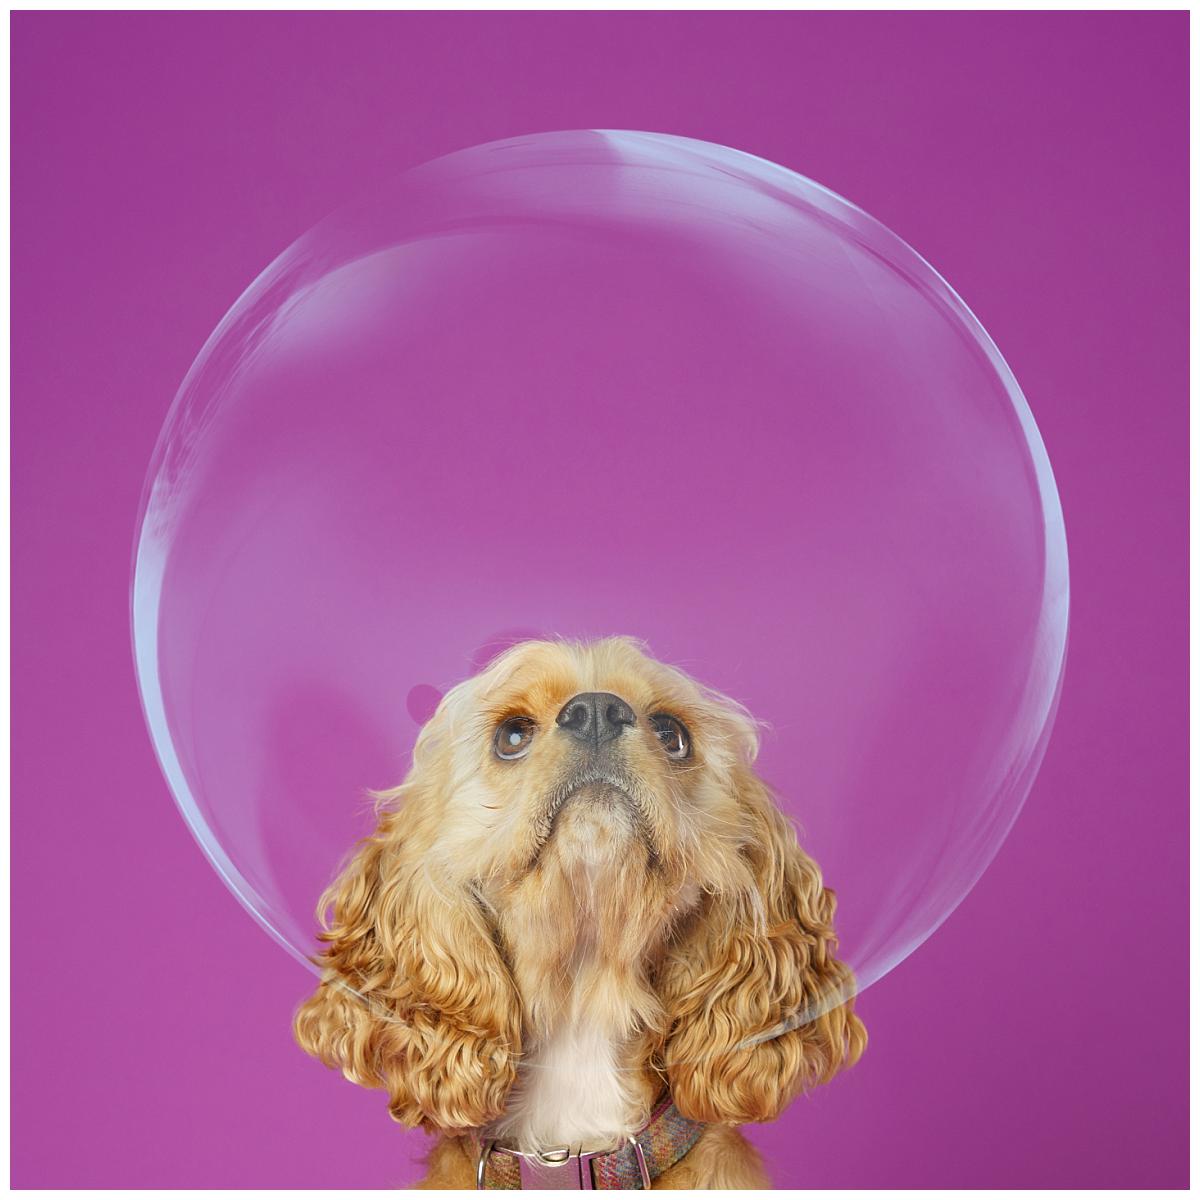 Professional pet photograph, taken by Northern Ireland's top pet photographer in Belfast of a spaniel on a purple back drop behind a giant bubble